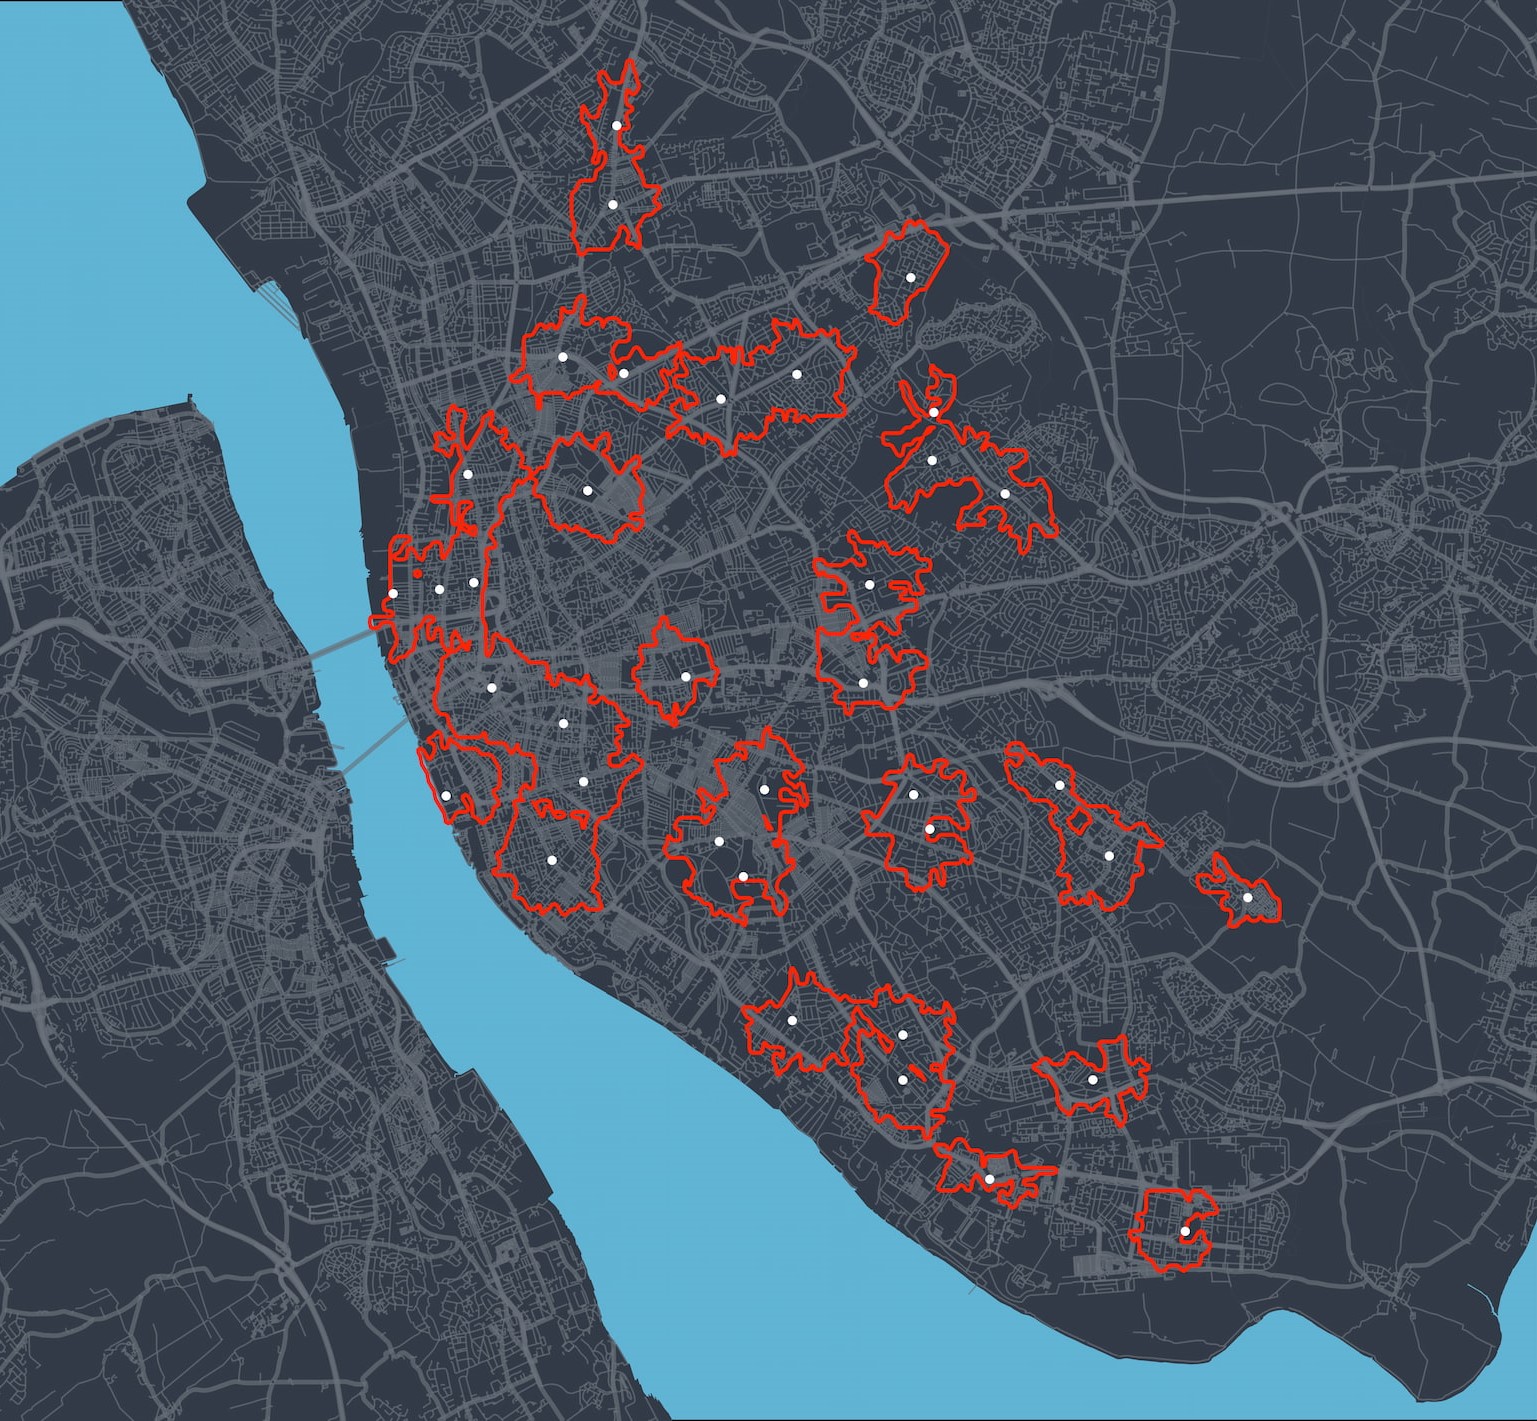 Accessibility of COVID-19 testing sites in Liverpool